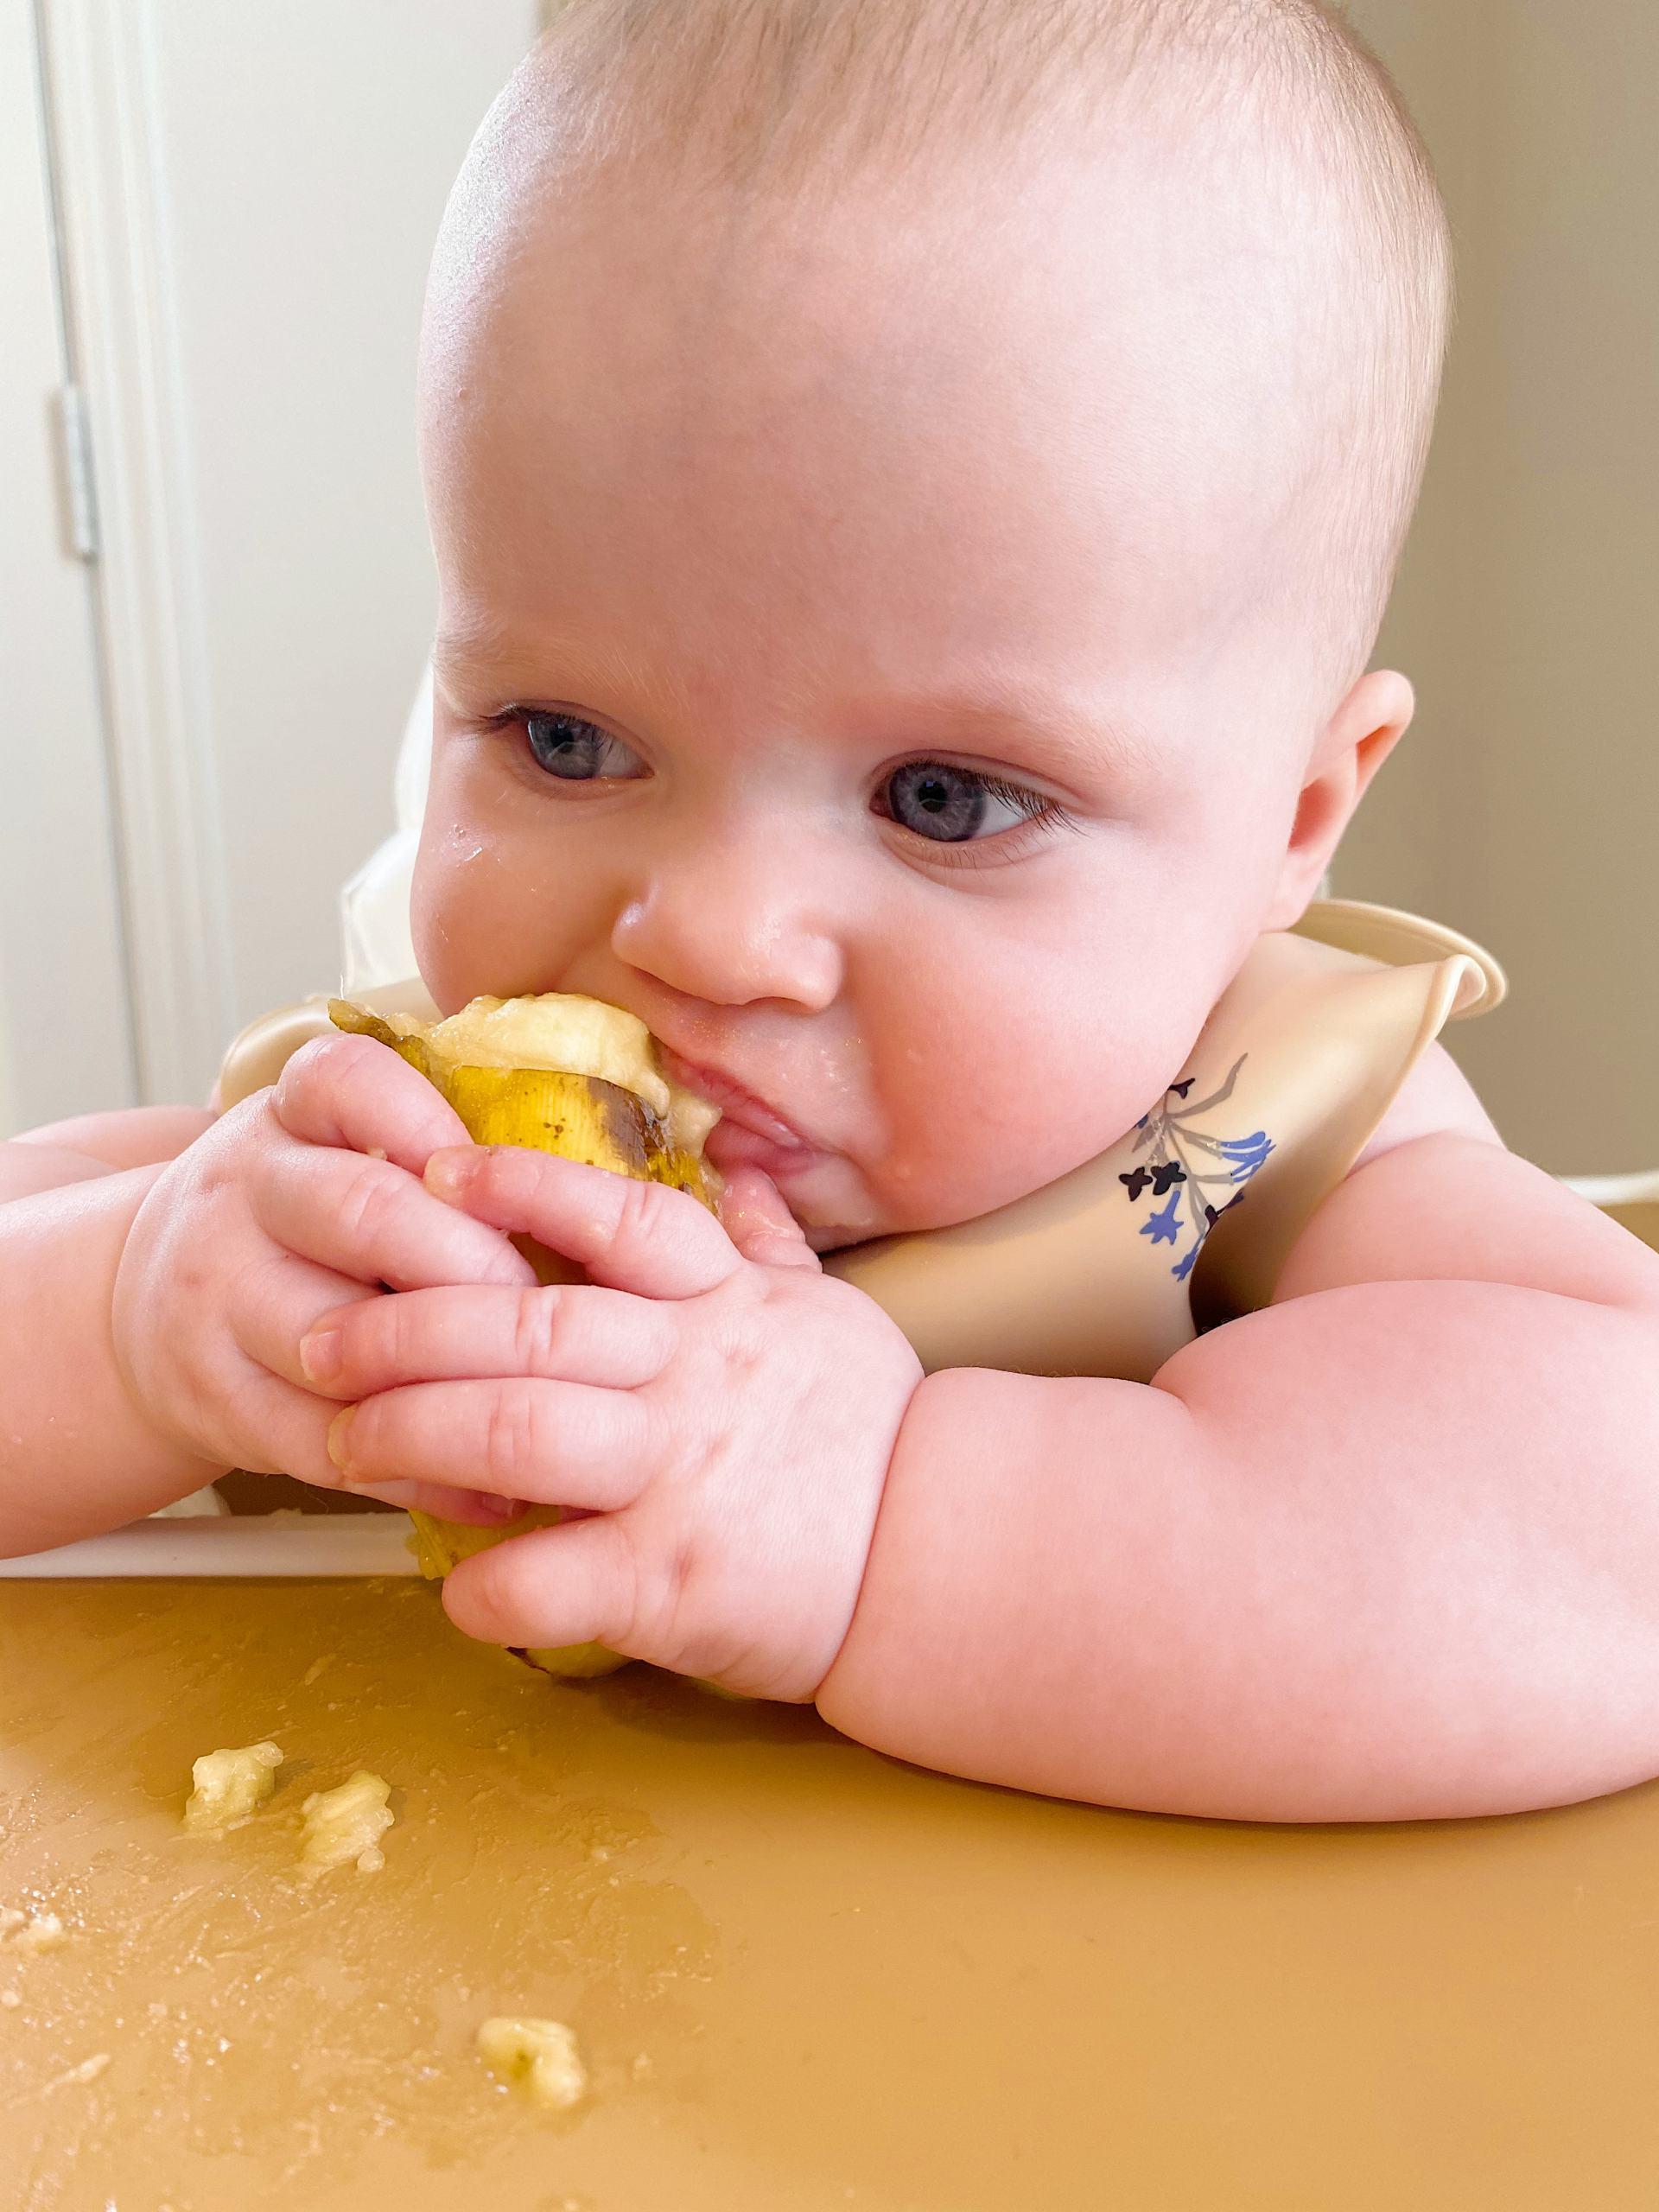 Starting Solids: Our Journey With Purees + Baby Led Weaning